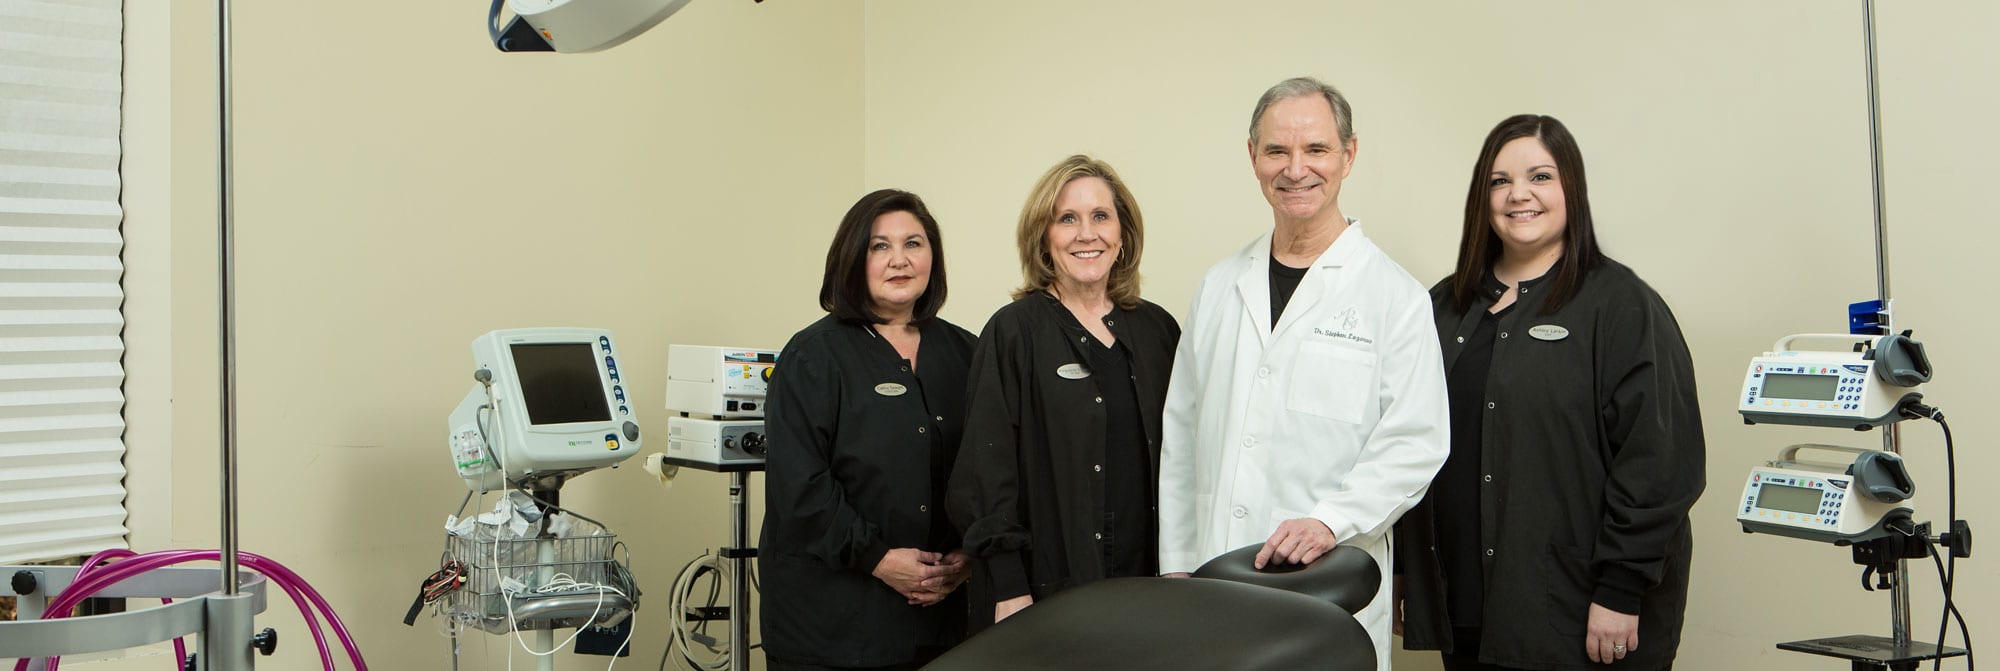 Dr. Stephen Lazarus, Cathy Seagle, Marguerite Graham, and Ashley Larkin posing for a photo in their Knoxville plastic surgery office